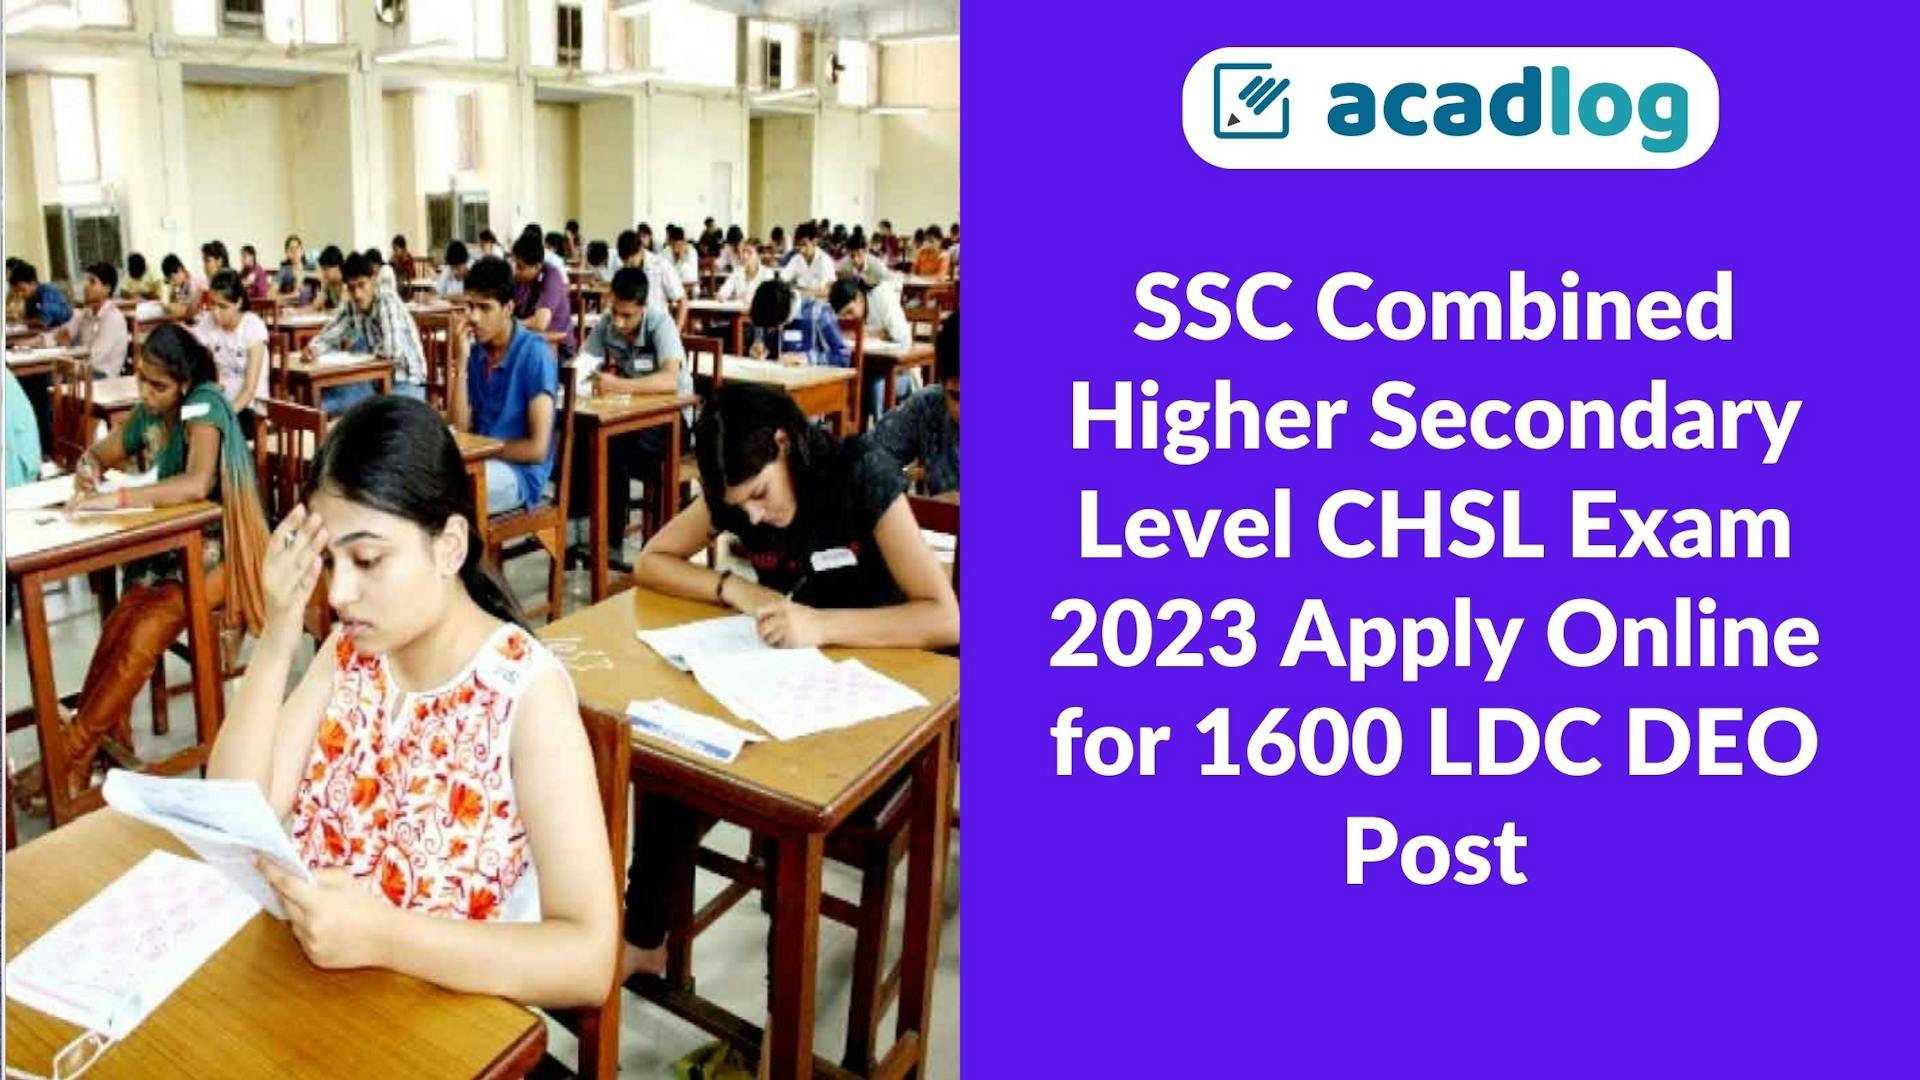 SSC Combined Higher Secondary Level CHSL Exam 2023 Apply Online for 1600 LDC DEO Post